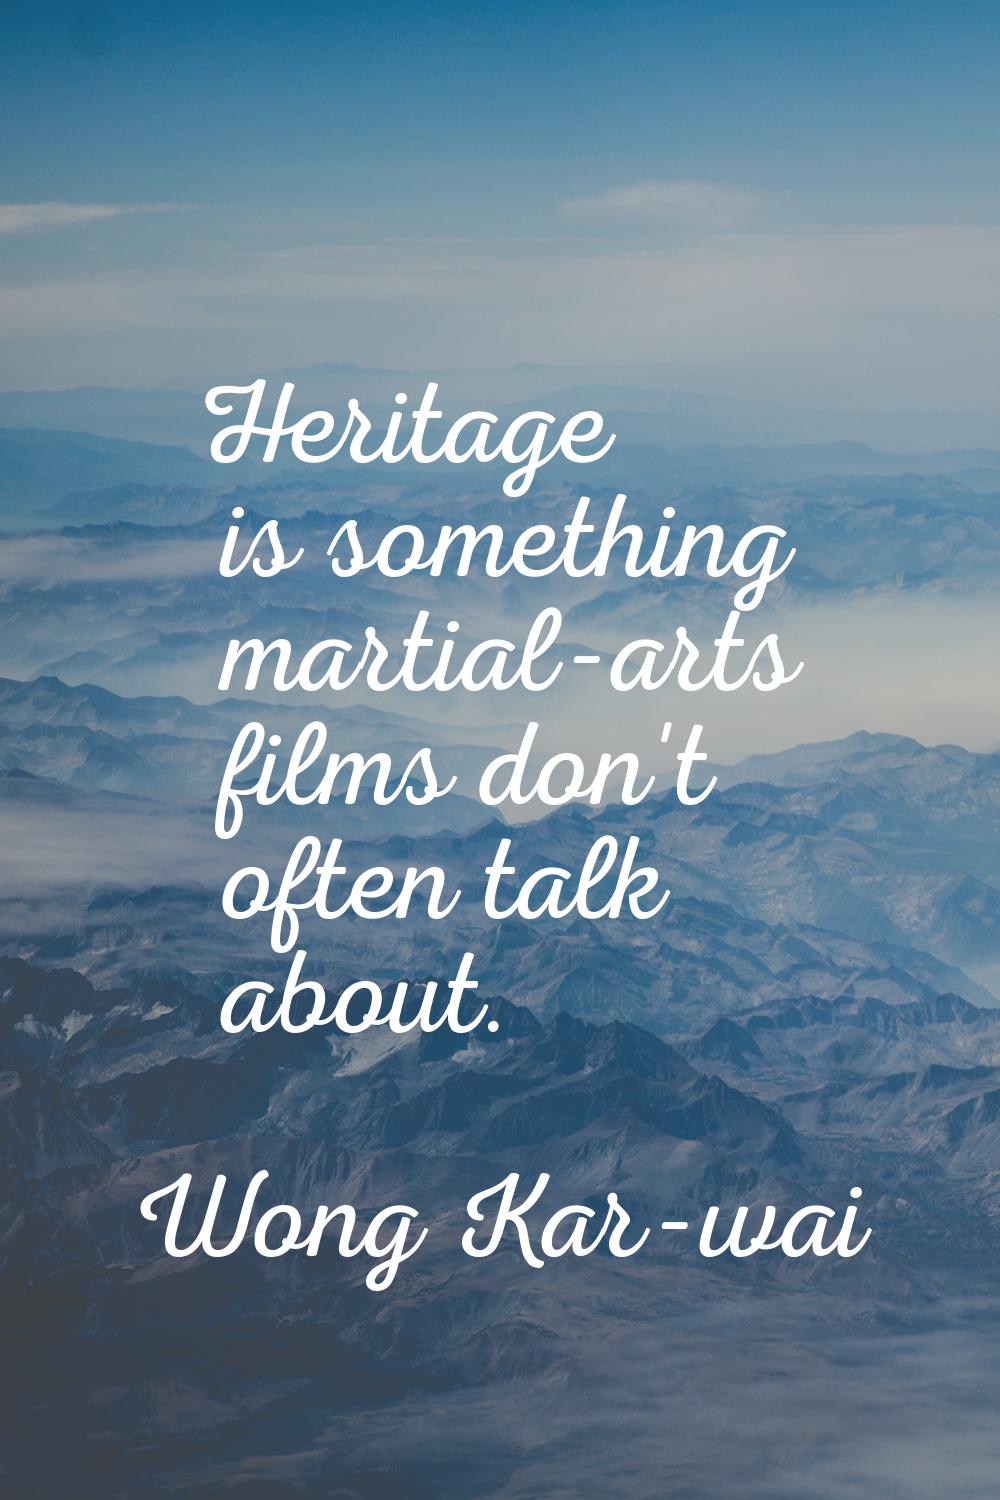 Heritage is something martial-arts films don't often talk about.